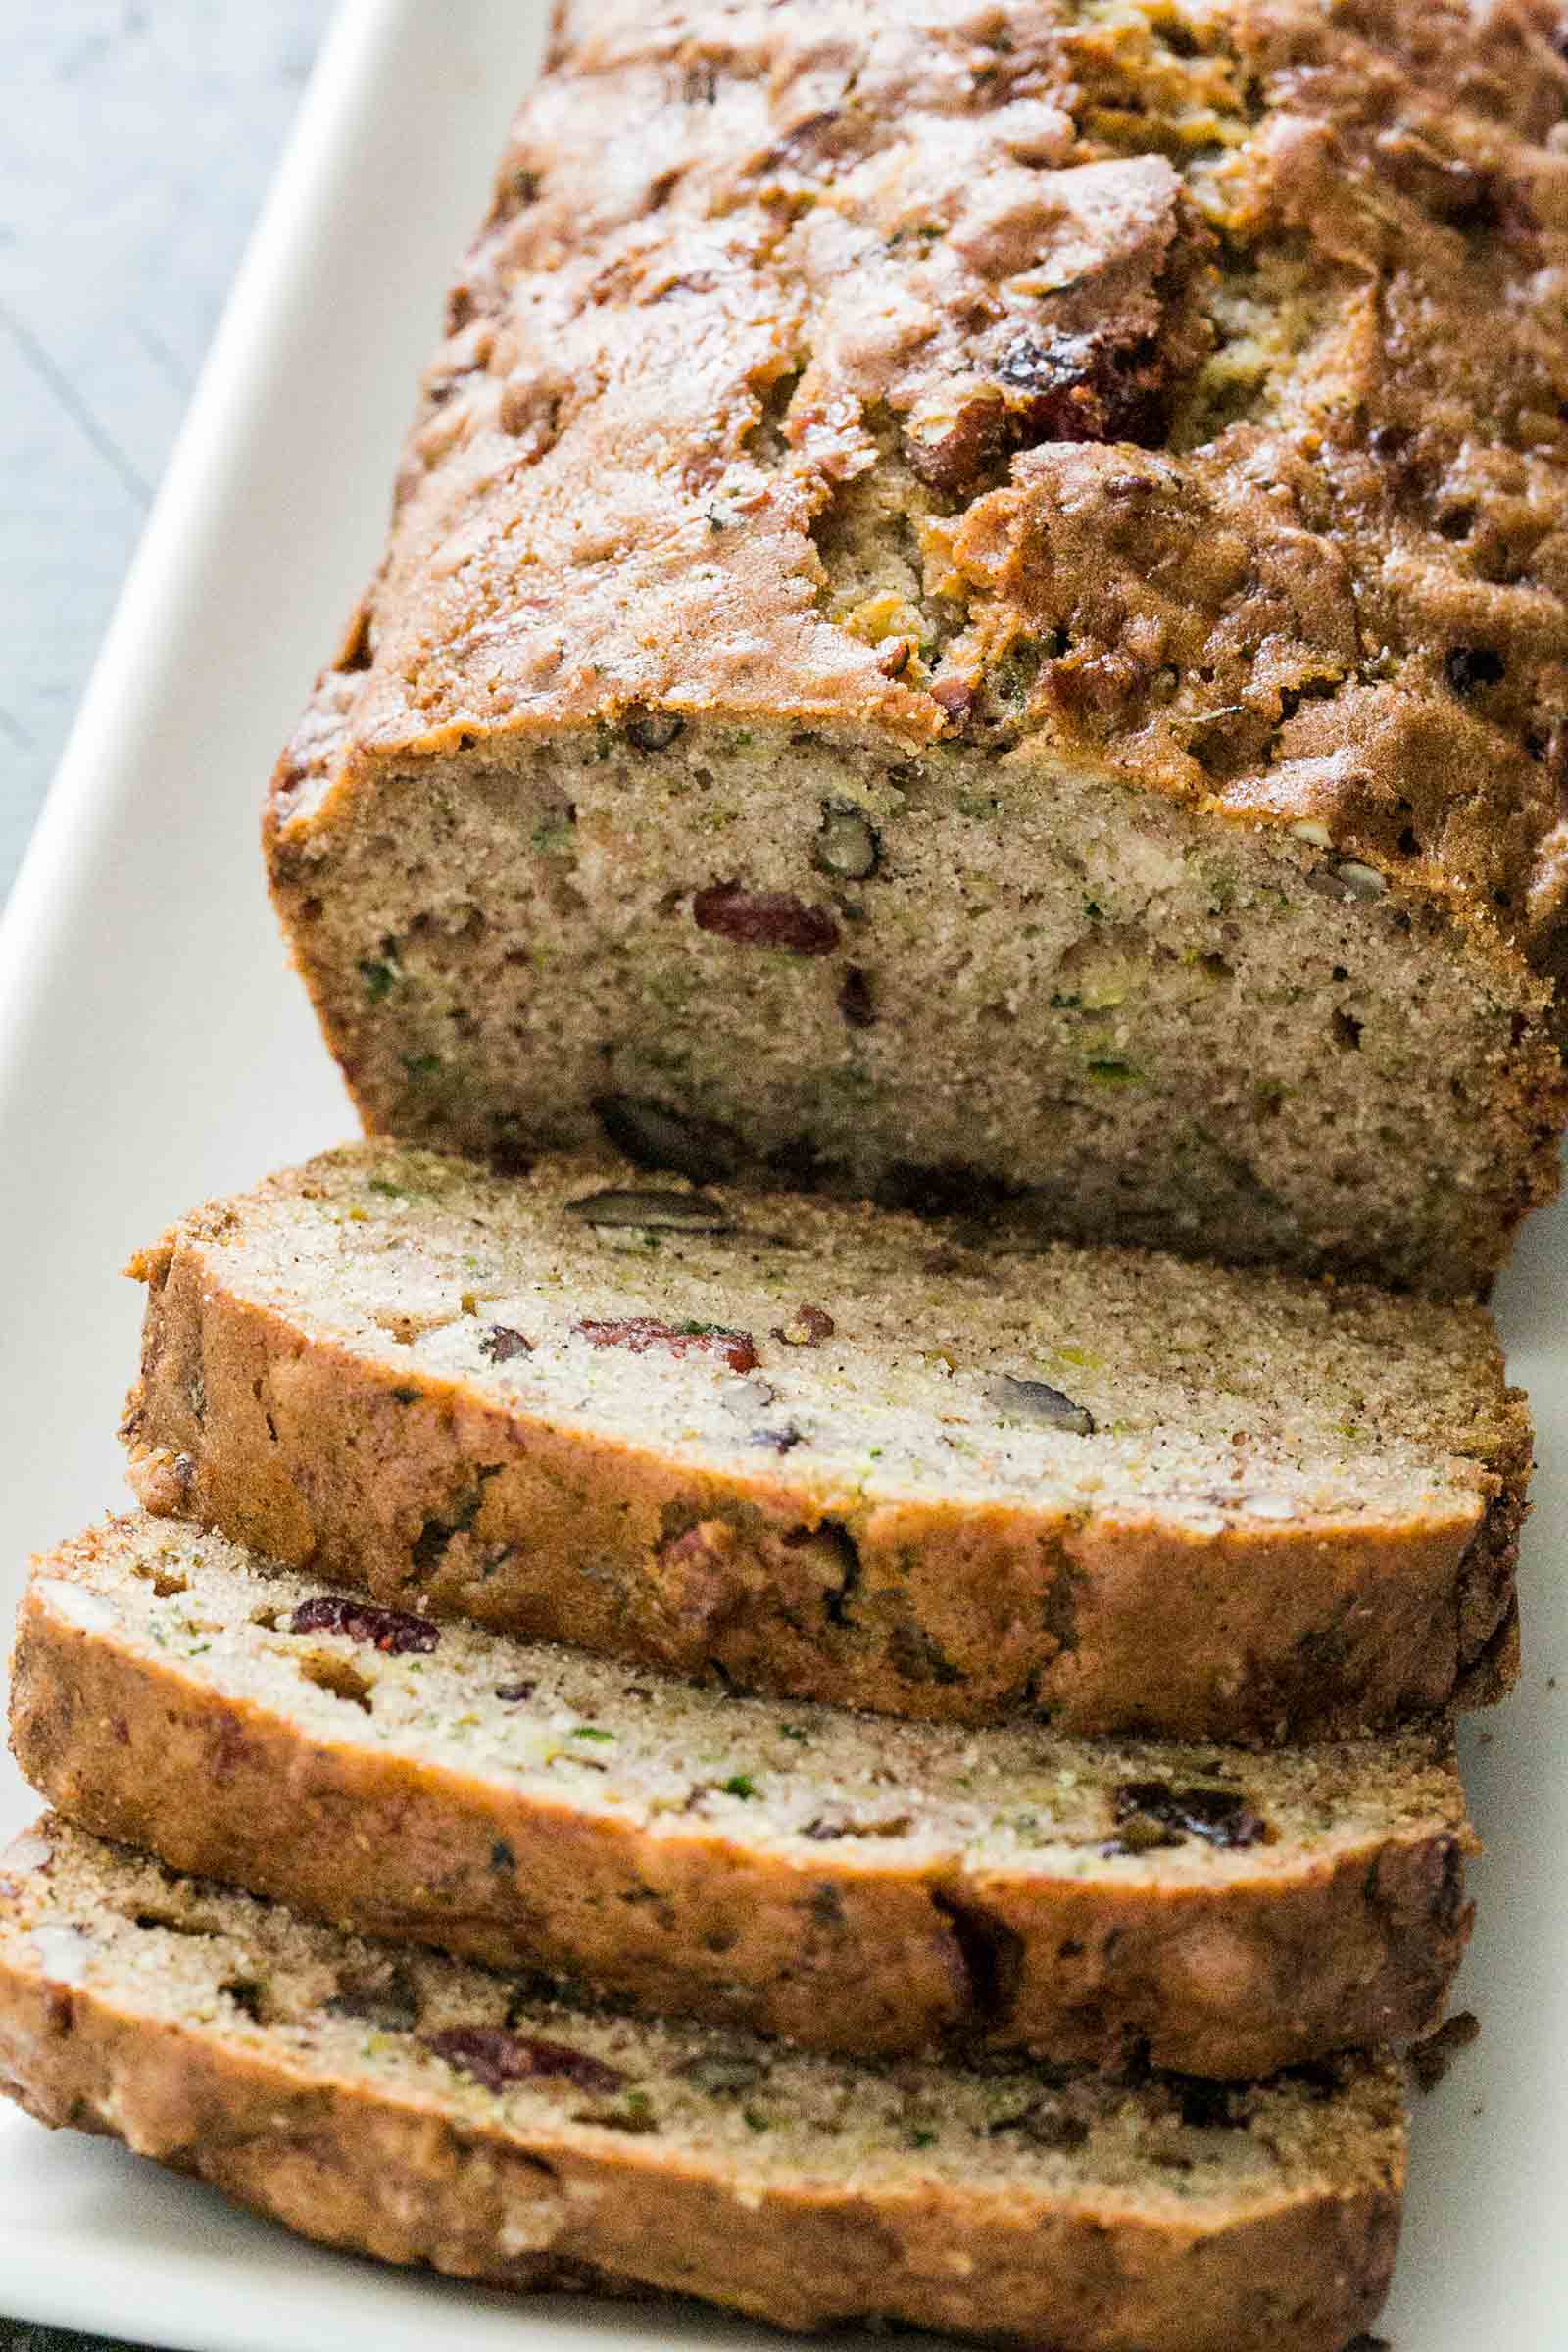 19 Zucchini Bread Recipes: You Would Love Try ( Step by Step Pictures)